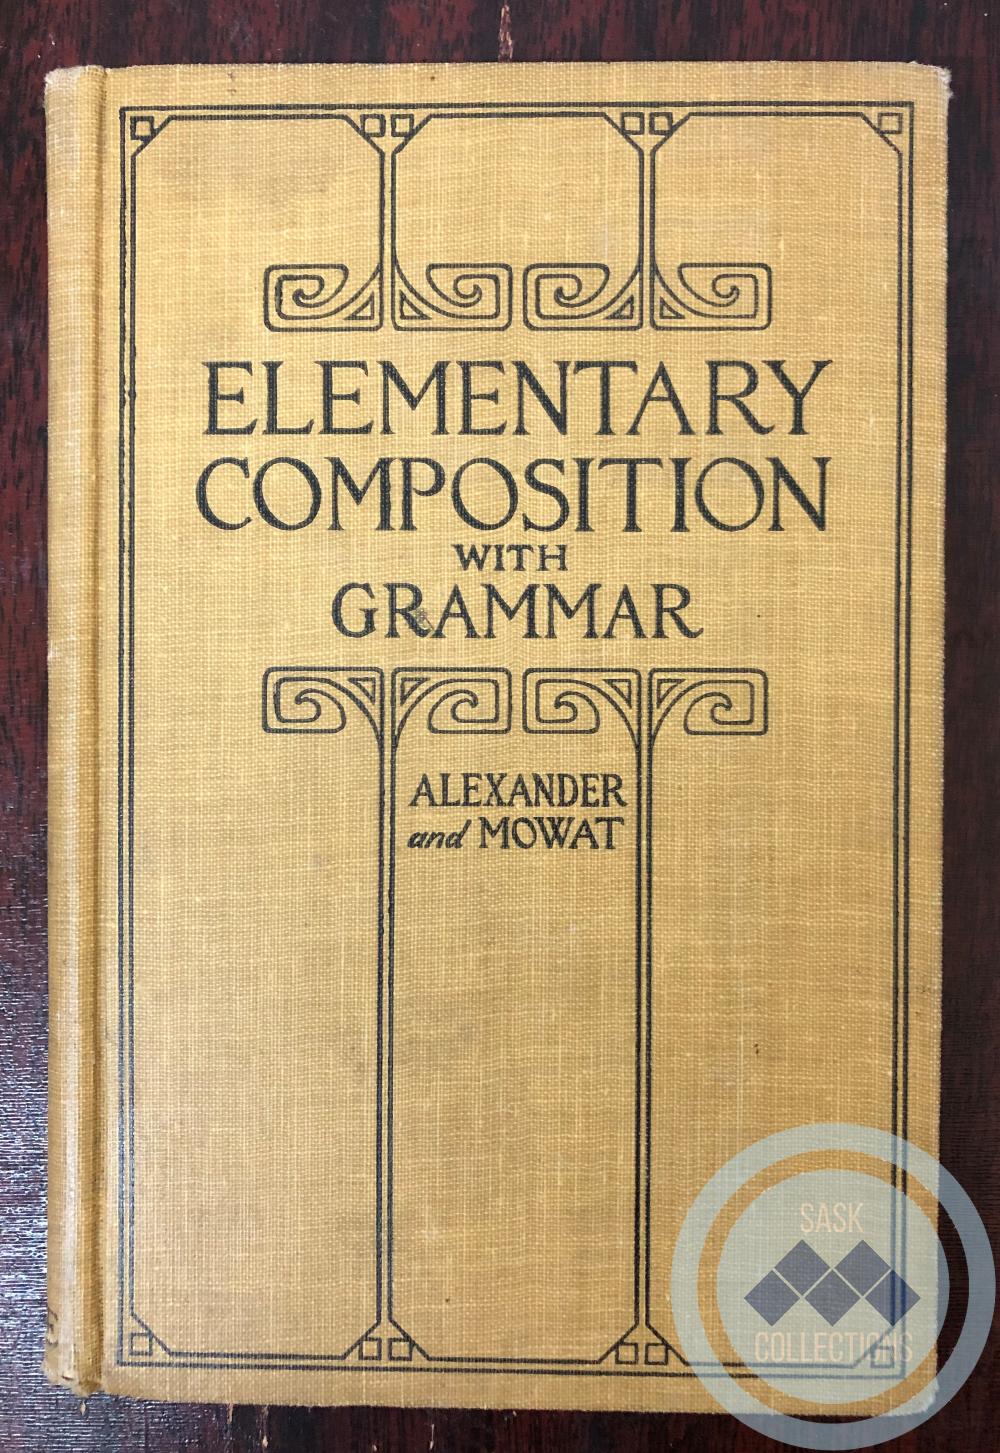 Elementary Composition with Grammar